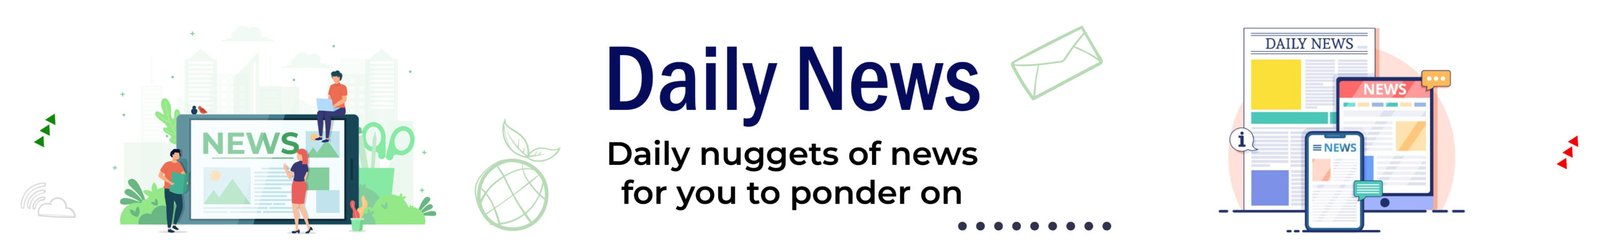 Daily News Web Banner